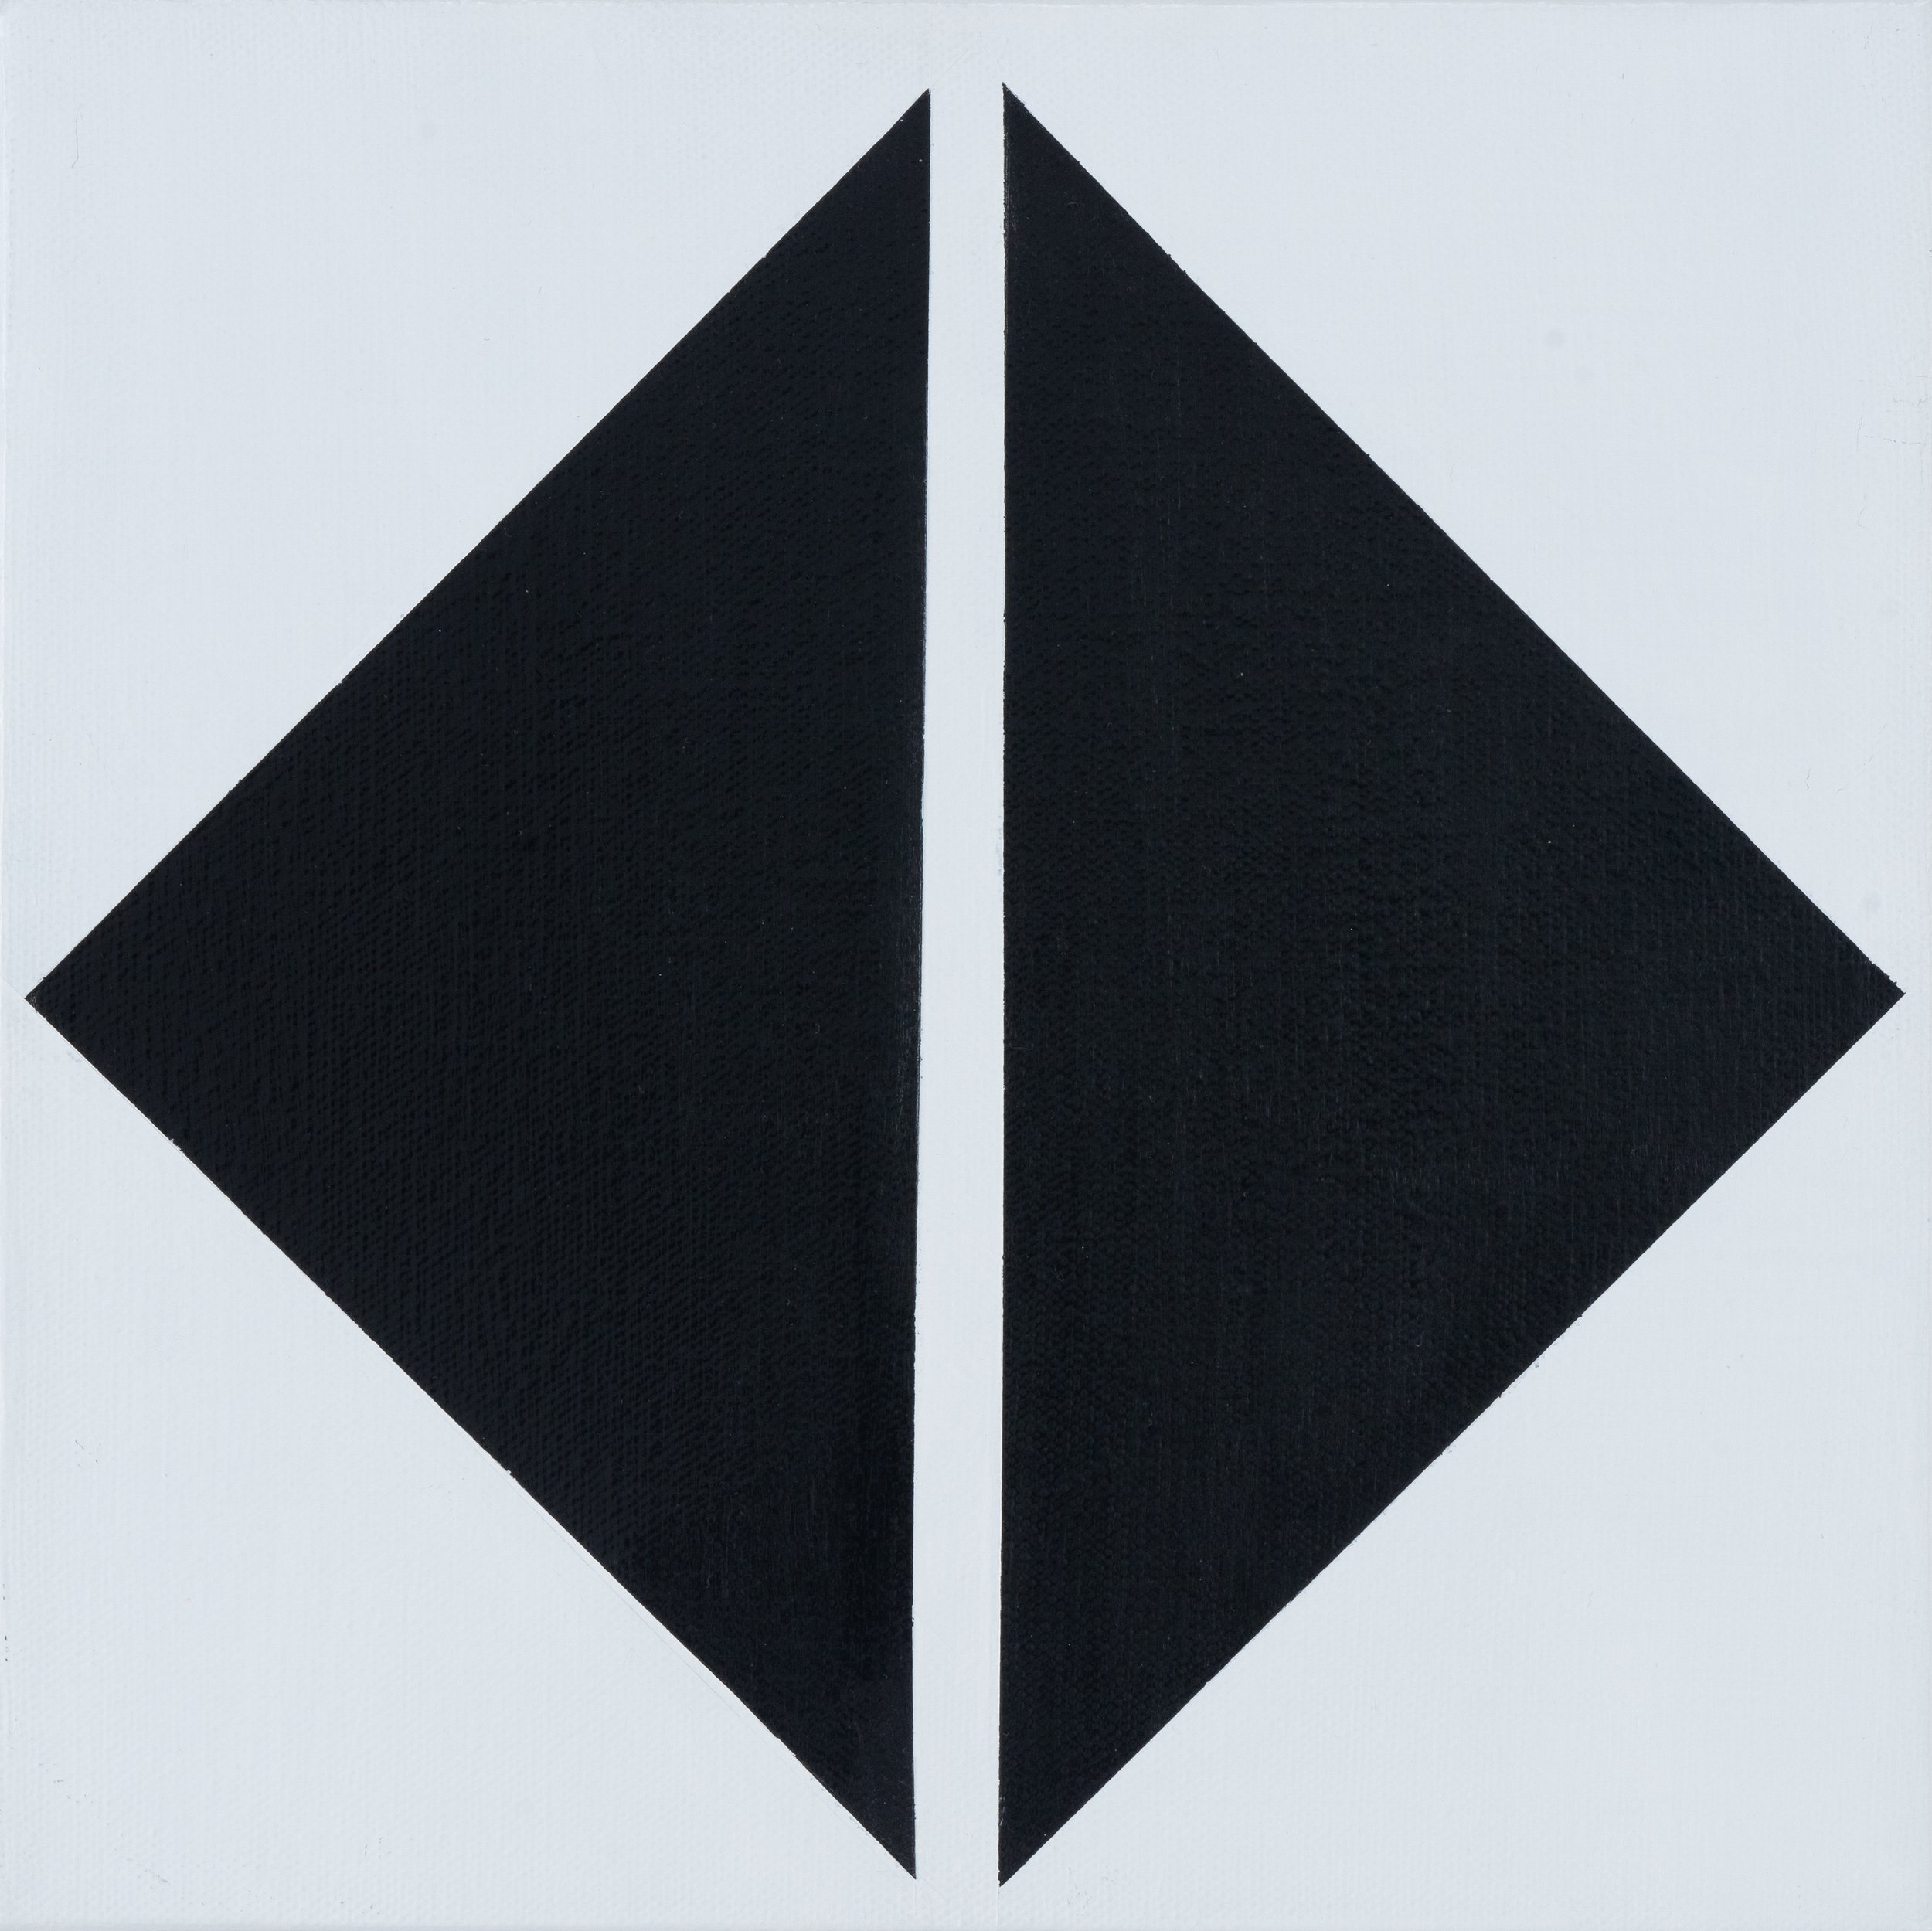 Divided Square, 2022, acrylic on canvas, 10x10 inches